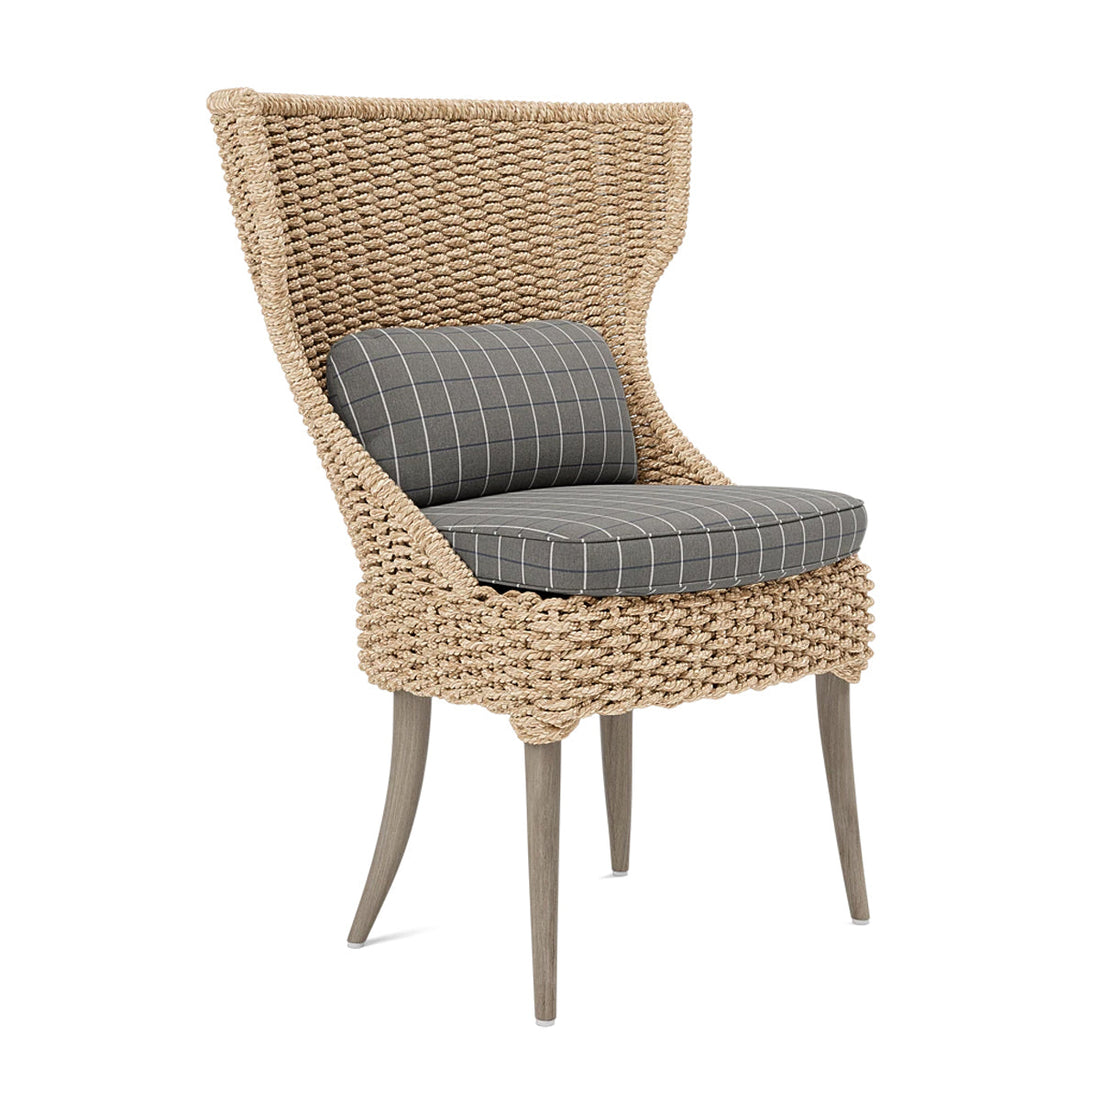 Made Goods Arla Faux Rope Outdoor Dining Chair in Clyde Fabric